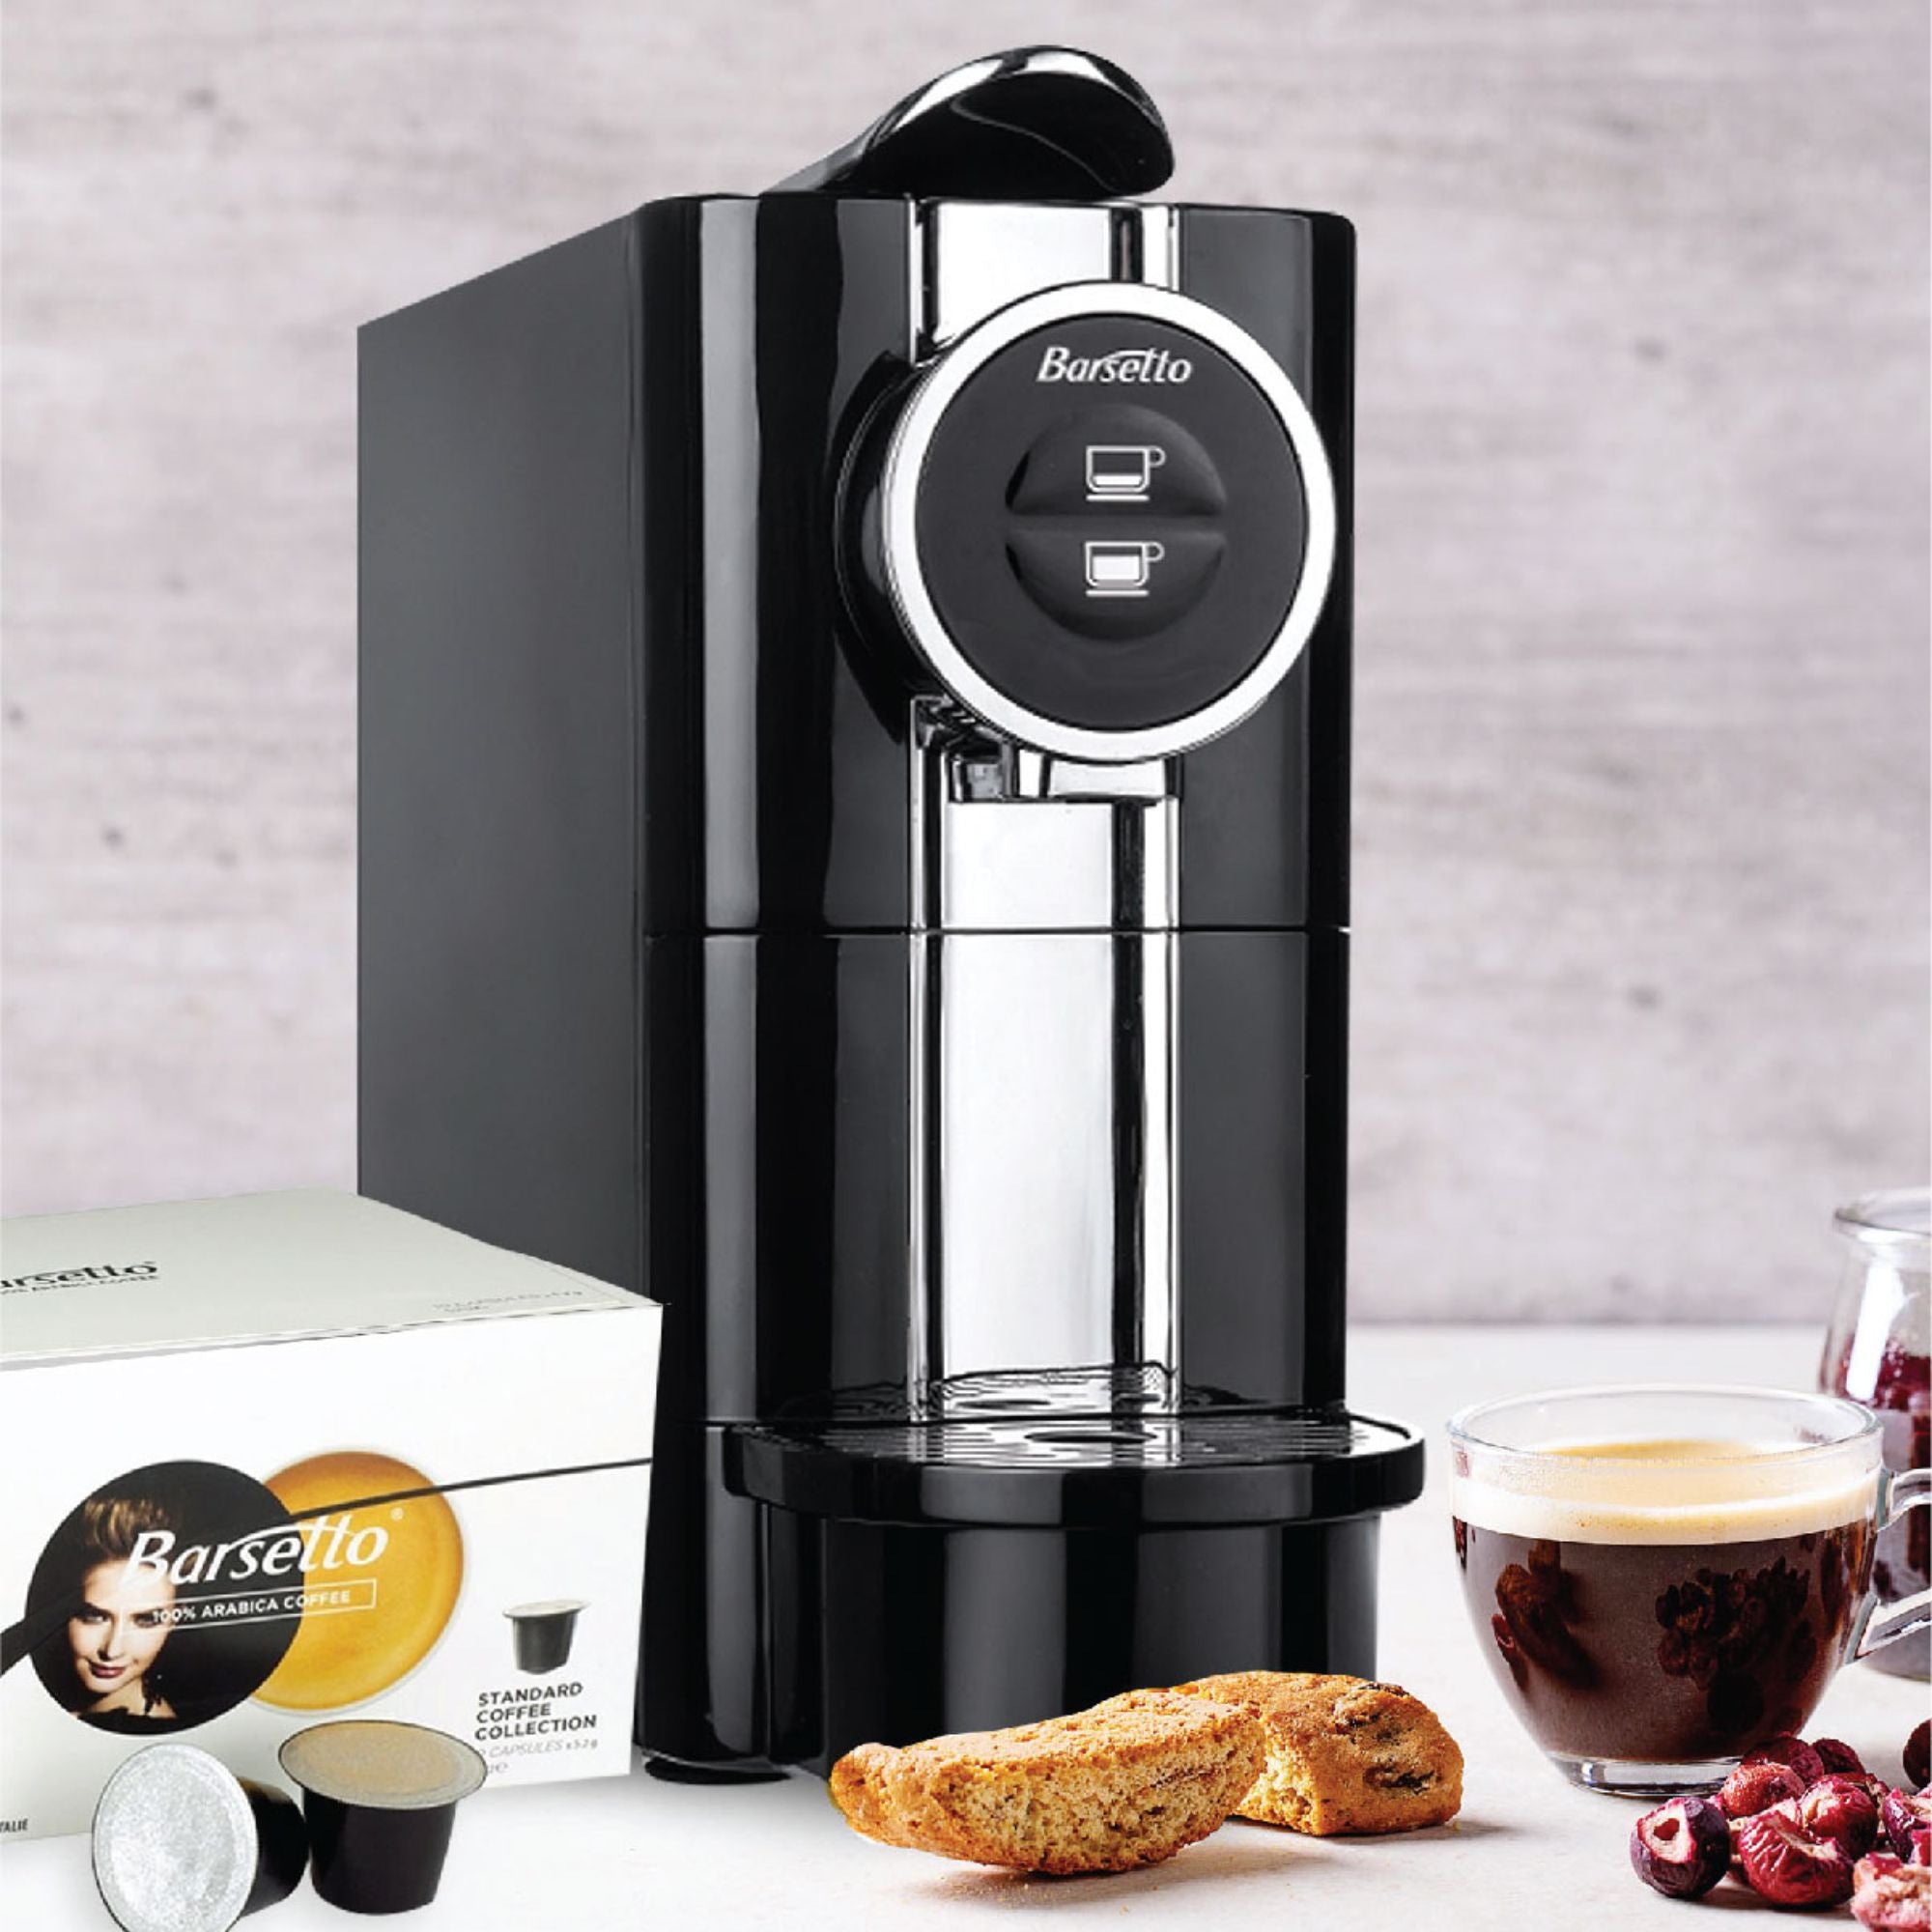 Lifestyle image of Barsetto one-touch espresso machine on a white countertop with a light gray backsplash behind and a box of espresso pods, pieces of biscotto, and a shot of espresso in a clear glass mug arranged around it